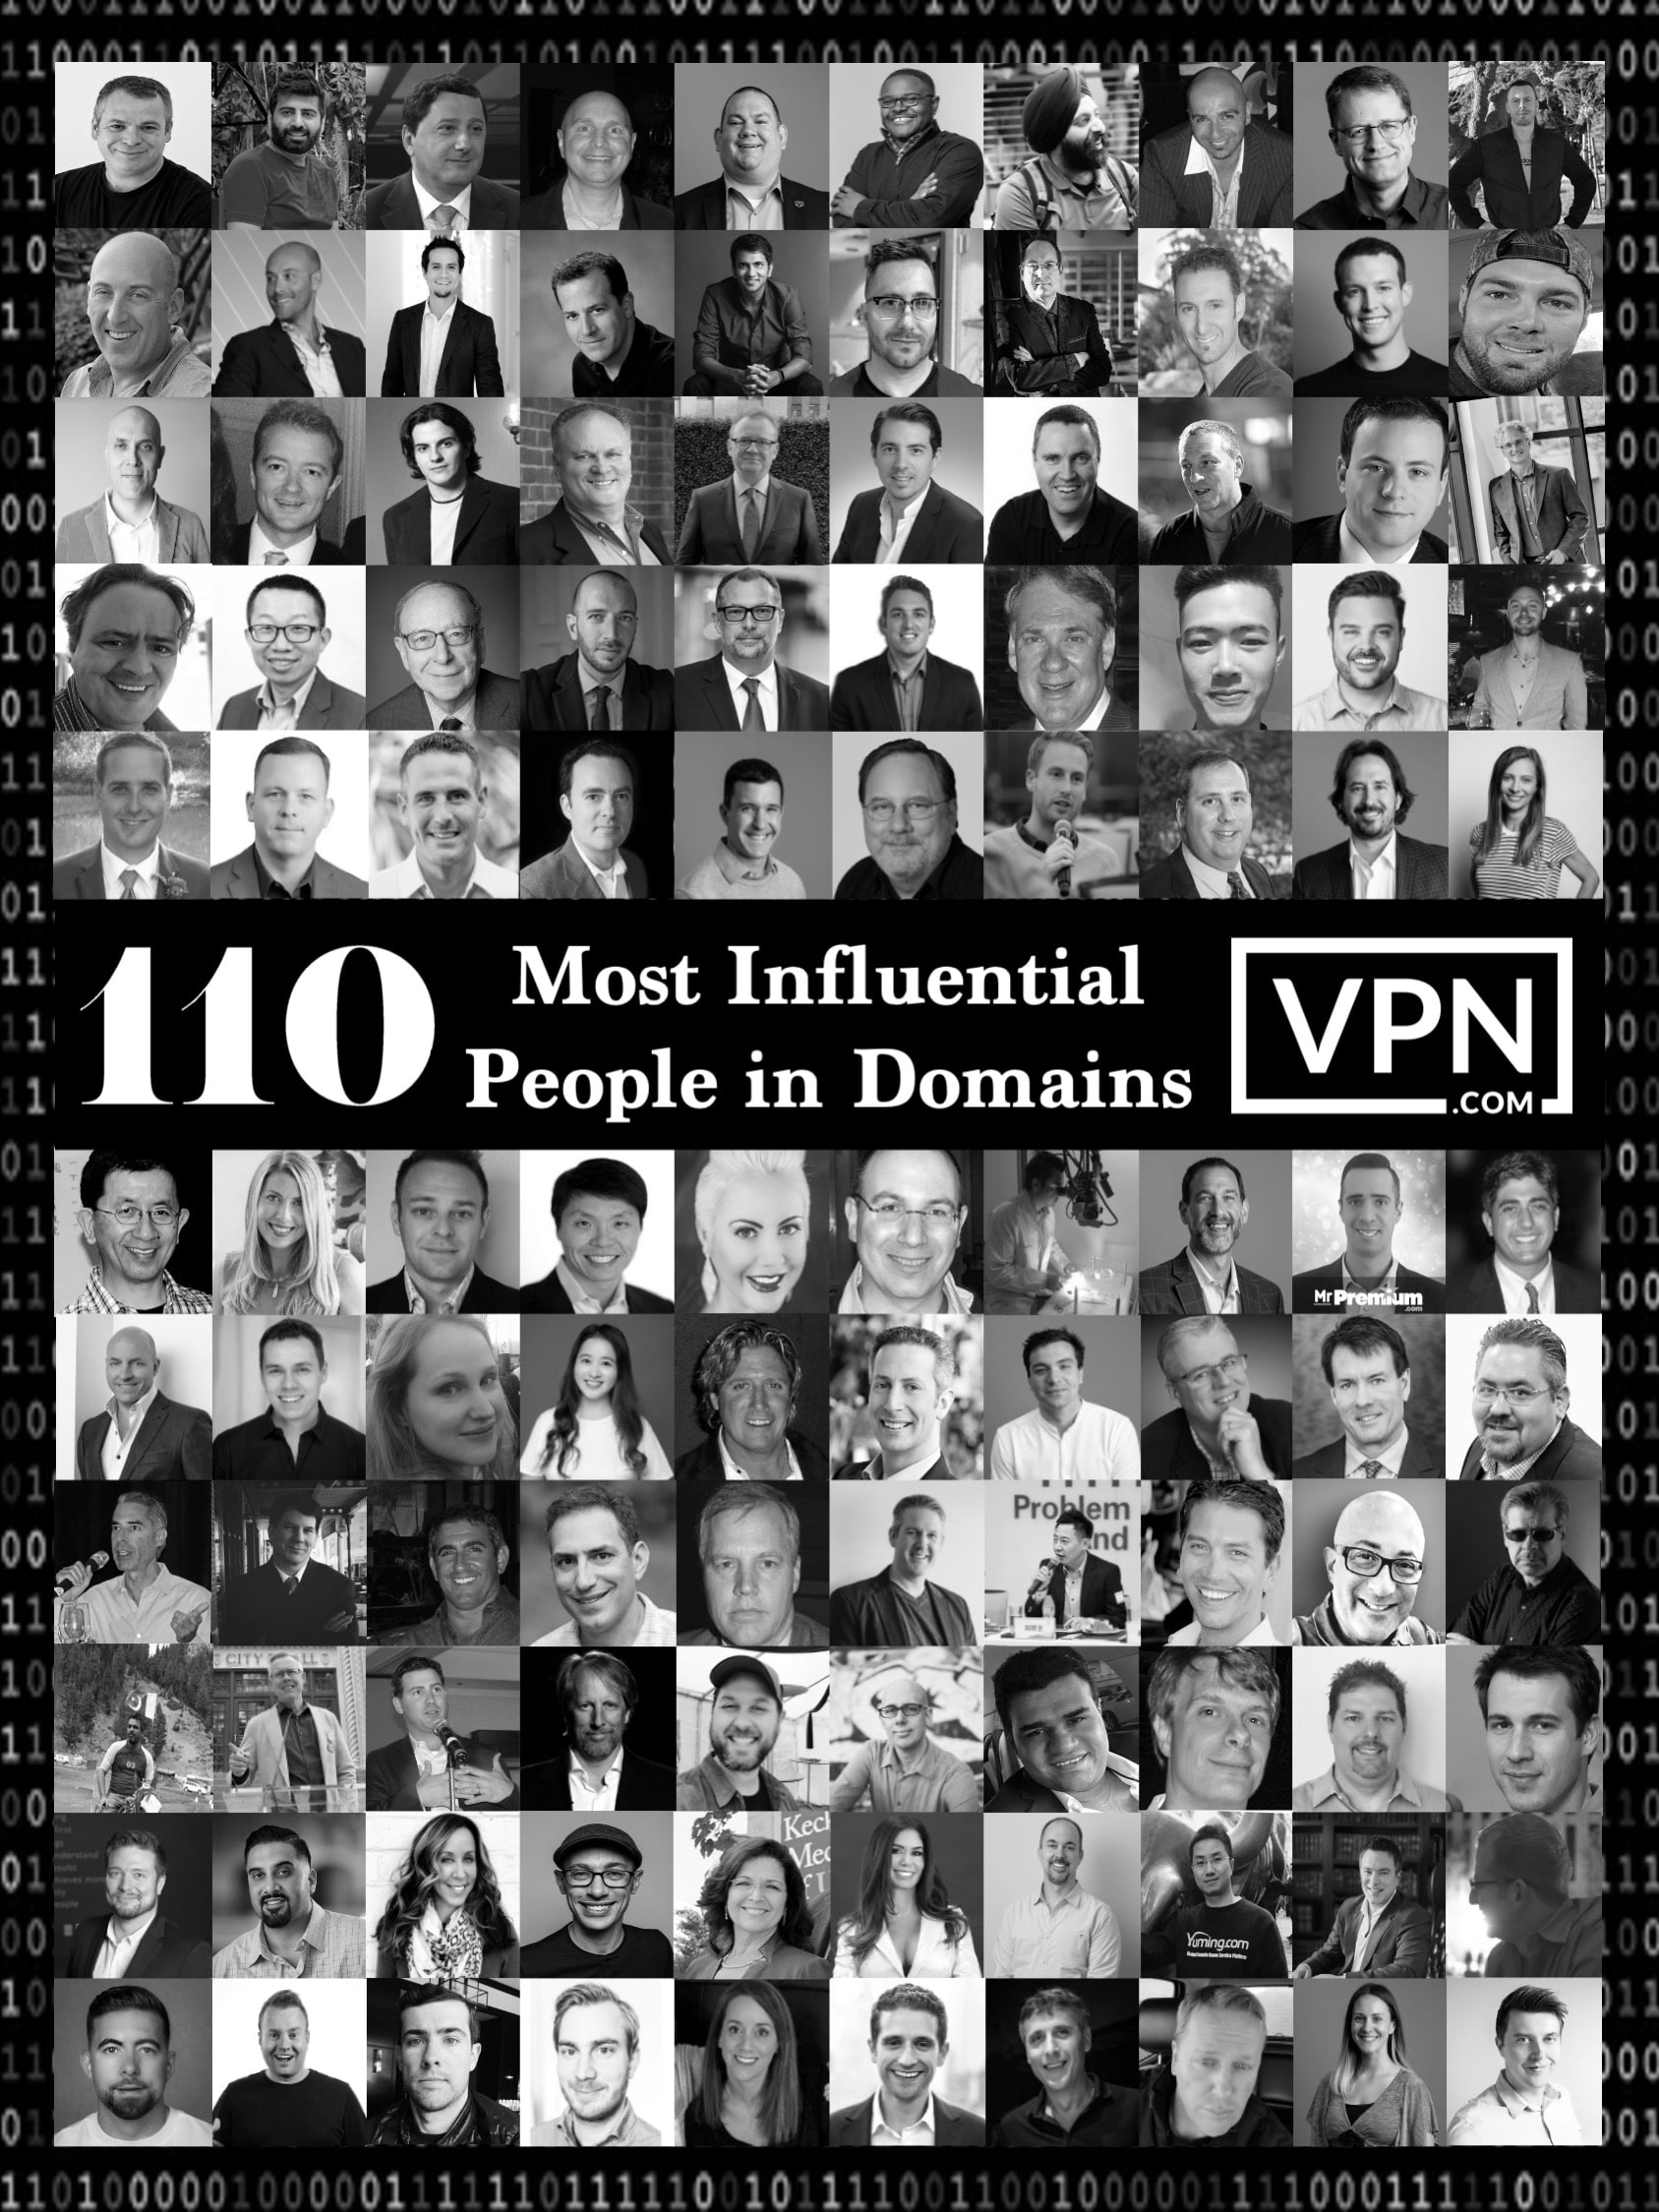 110 most influential people in domains with the image reflect the headshot pics for domain brokers